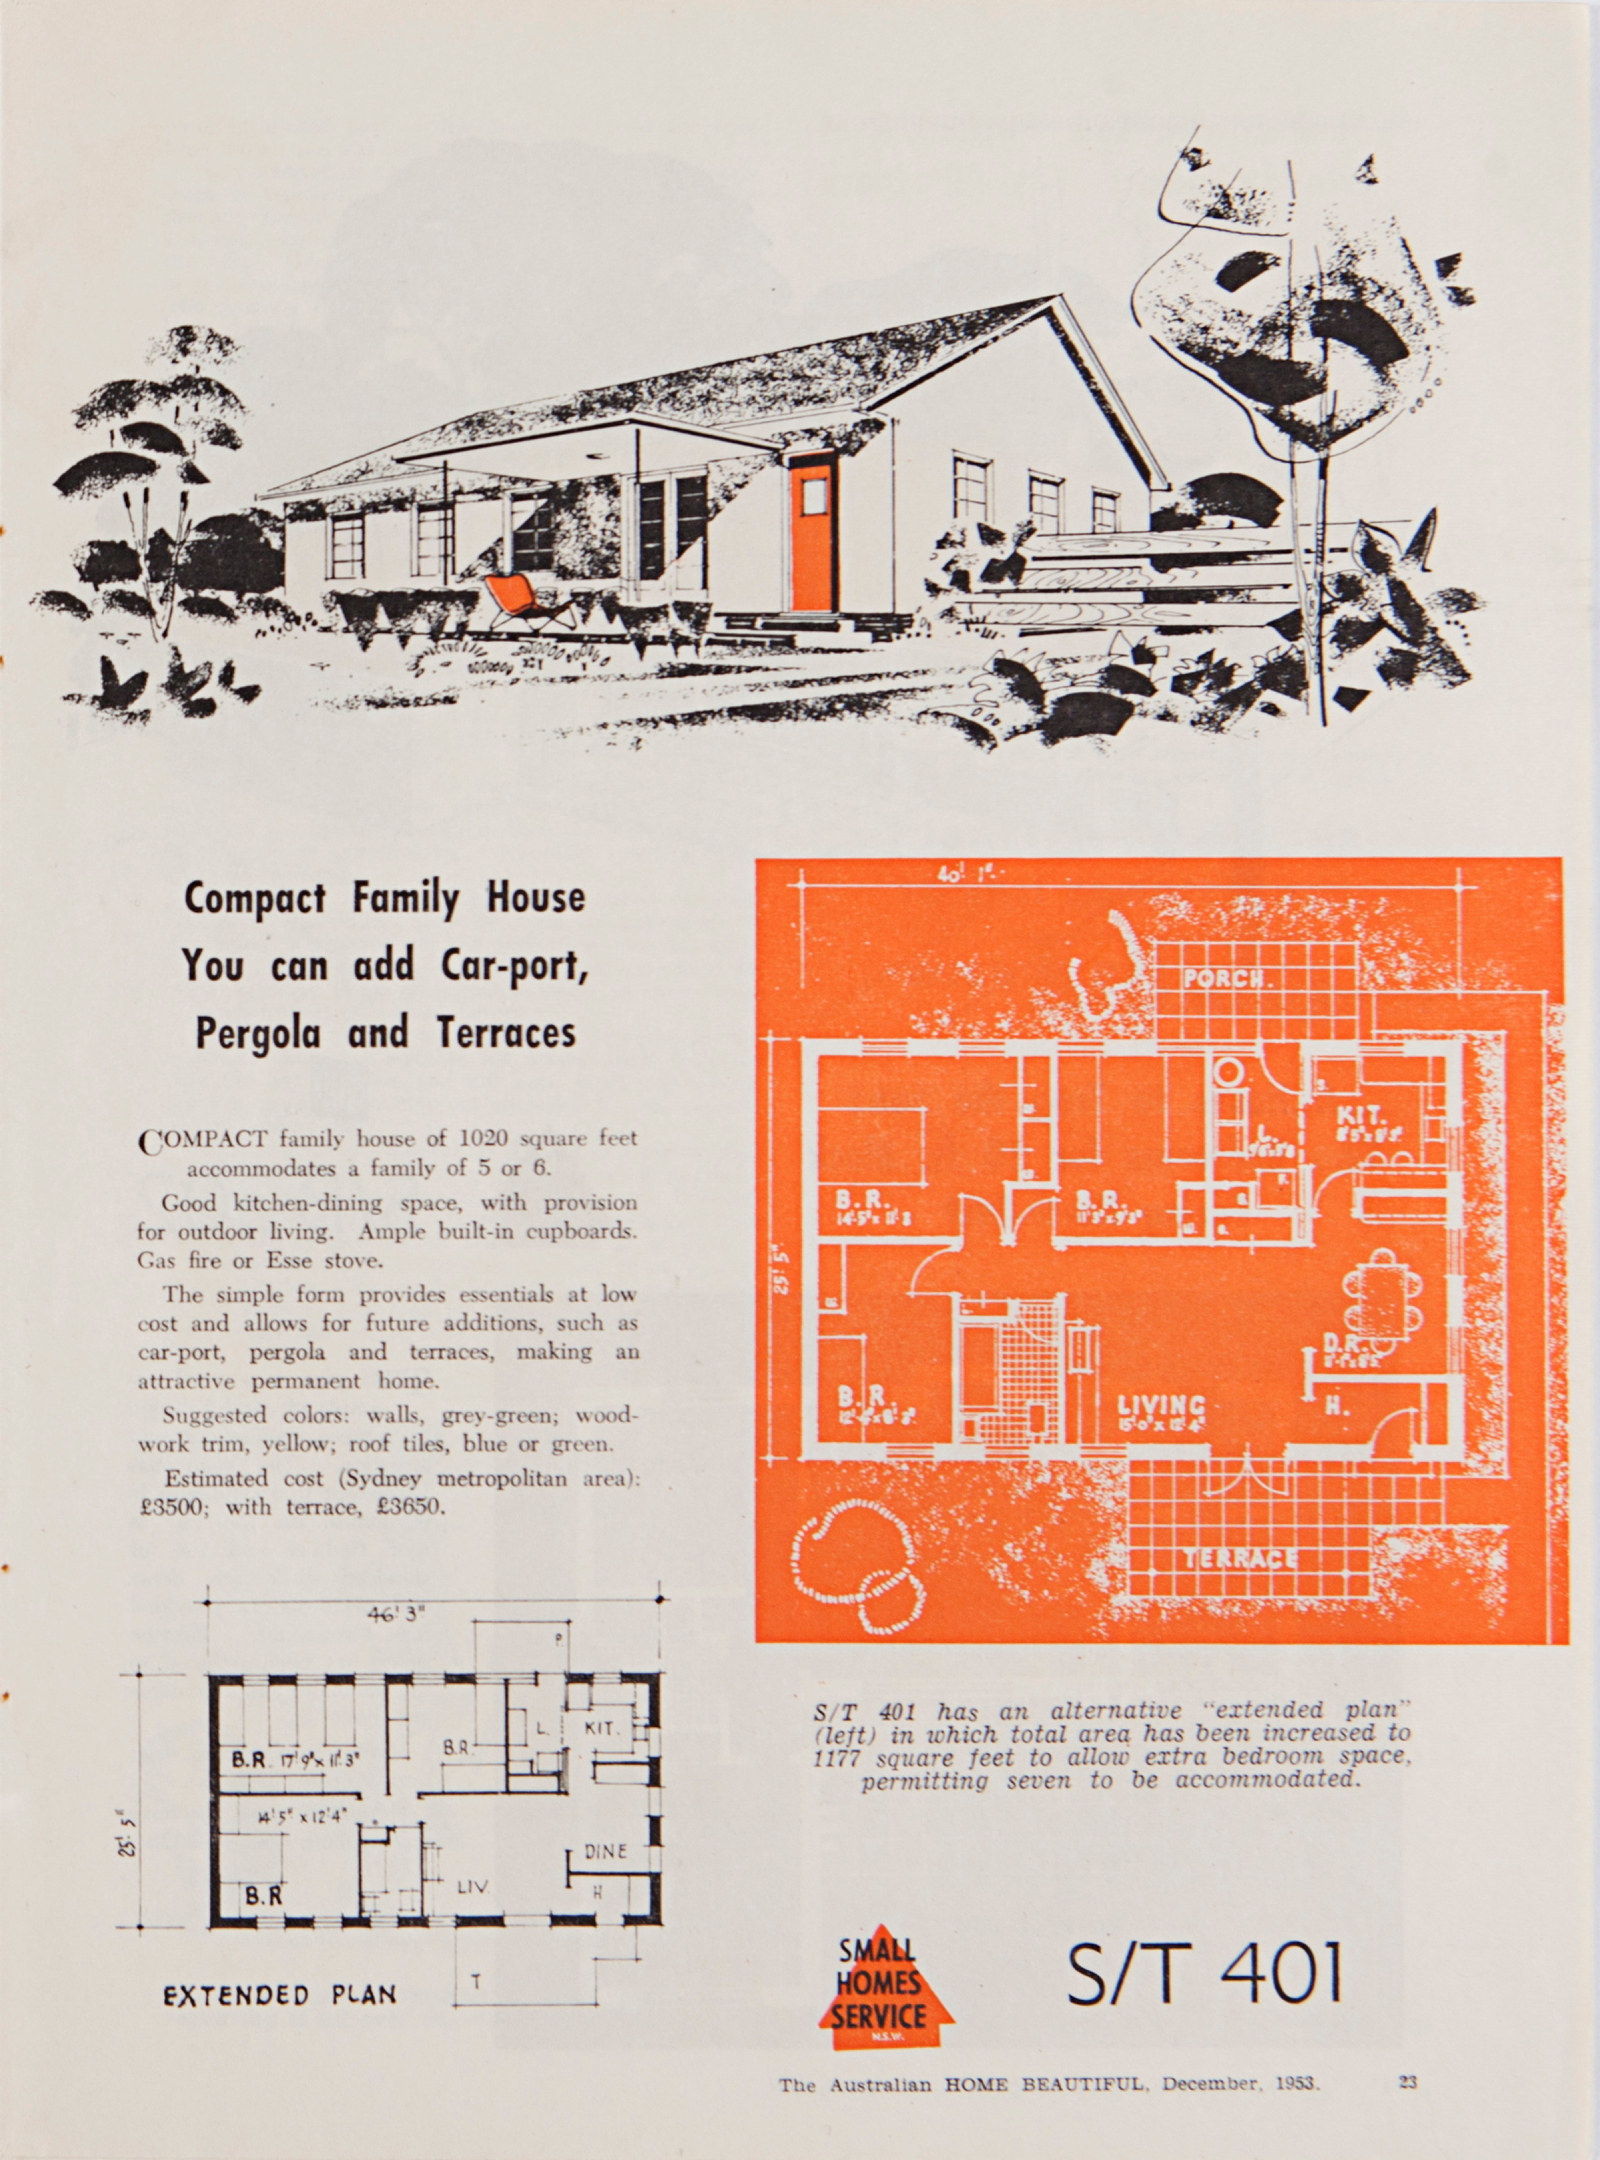 House plan on orange background with description and illustration.